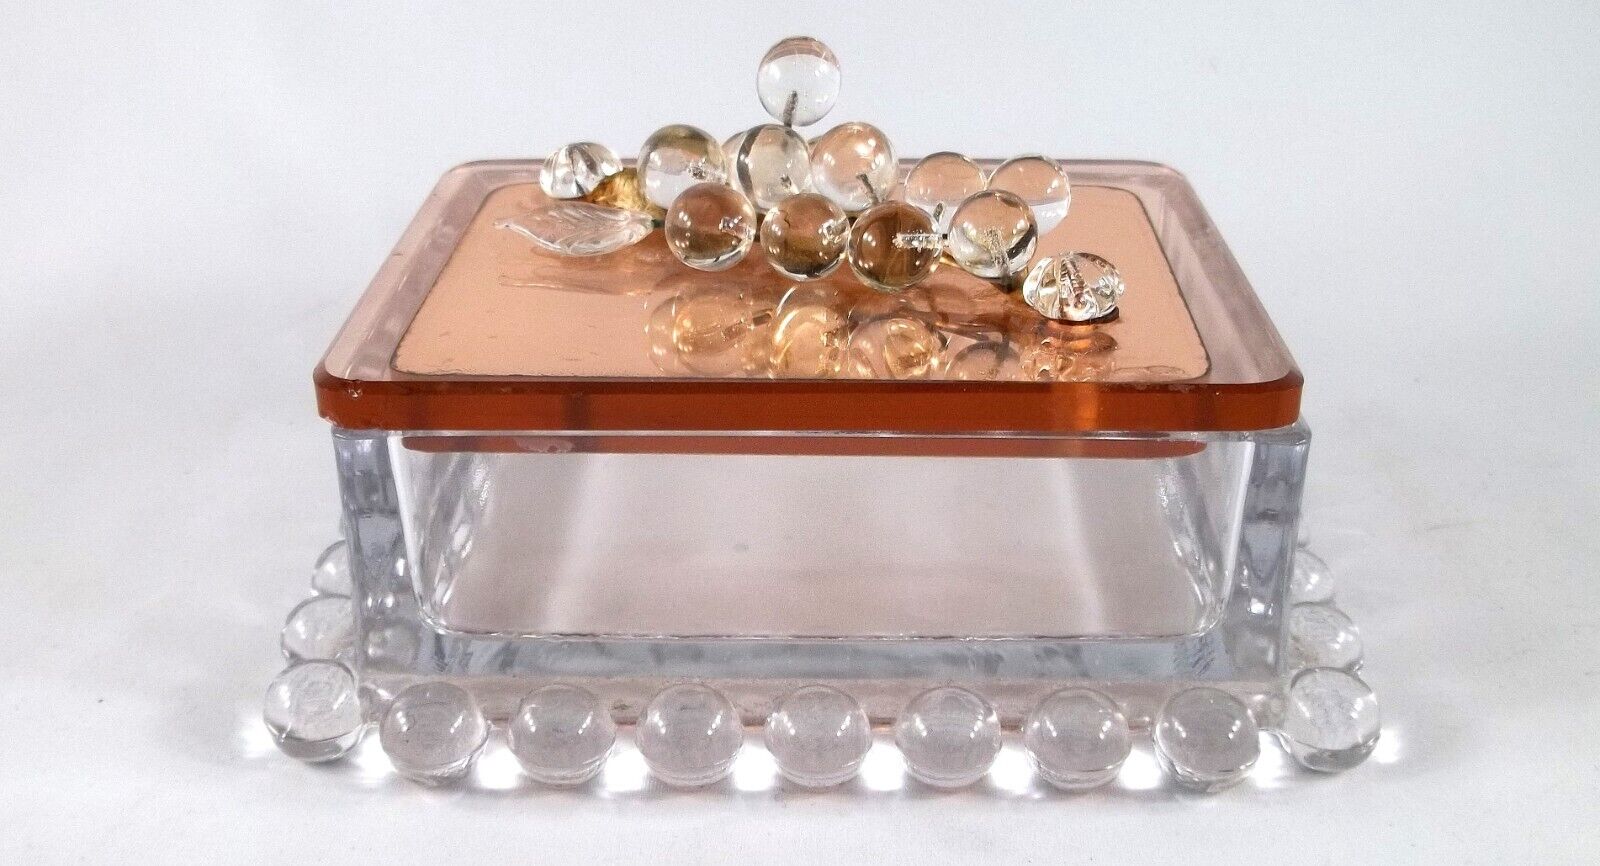 Vintage Imperial Candlewick Cigarette / Trinket Box, Copper Tone Mirrored Lid